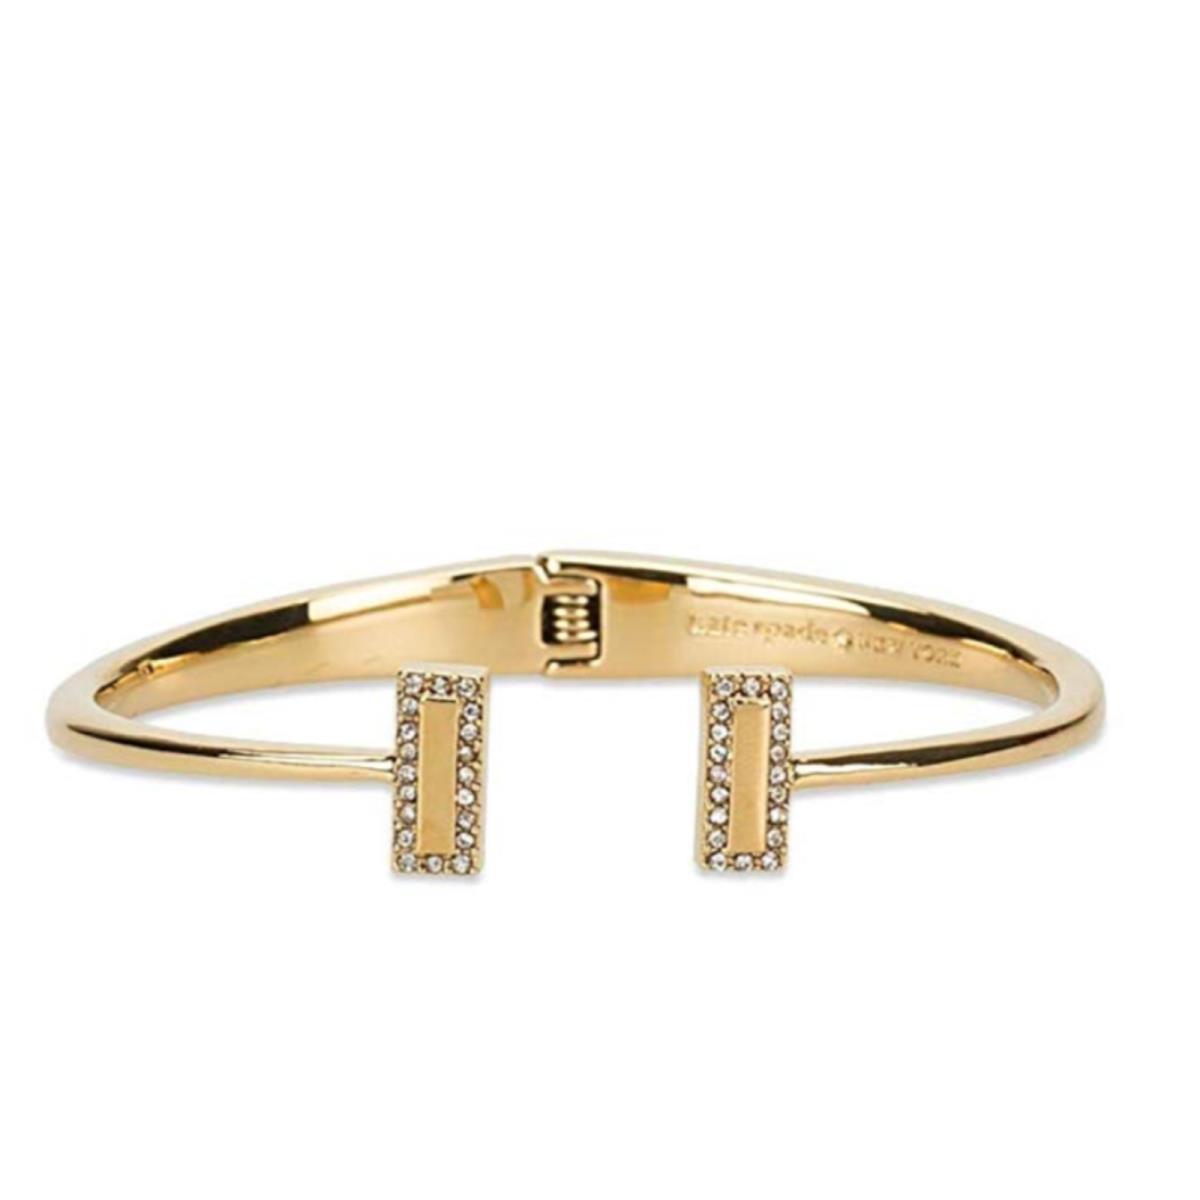 Kate Spade Raising The Bar Women`s Yellow Gold Tone Cuff Bracelet Crystals Pave